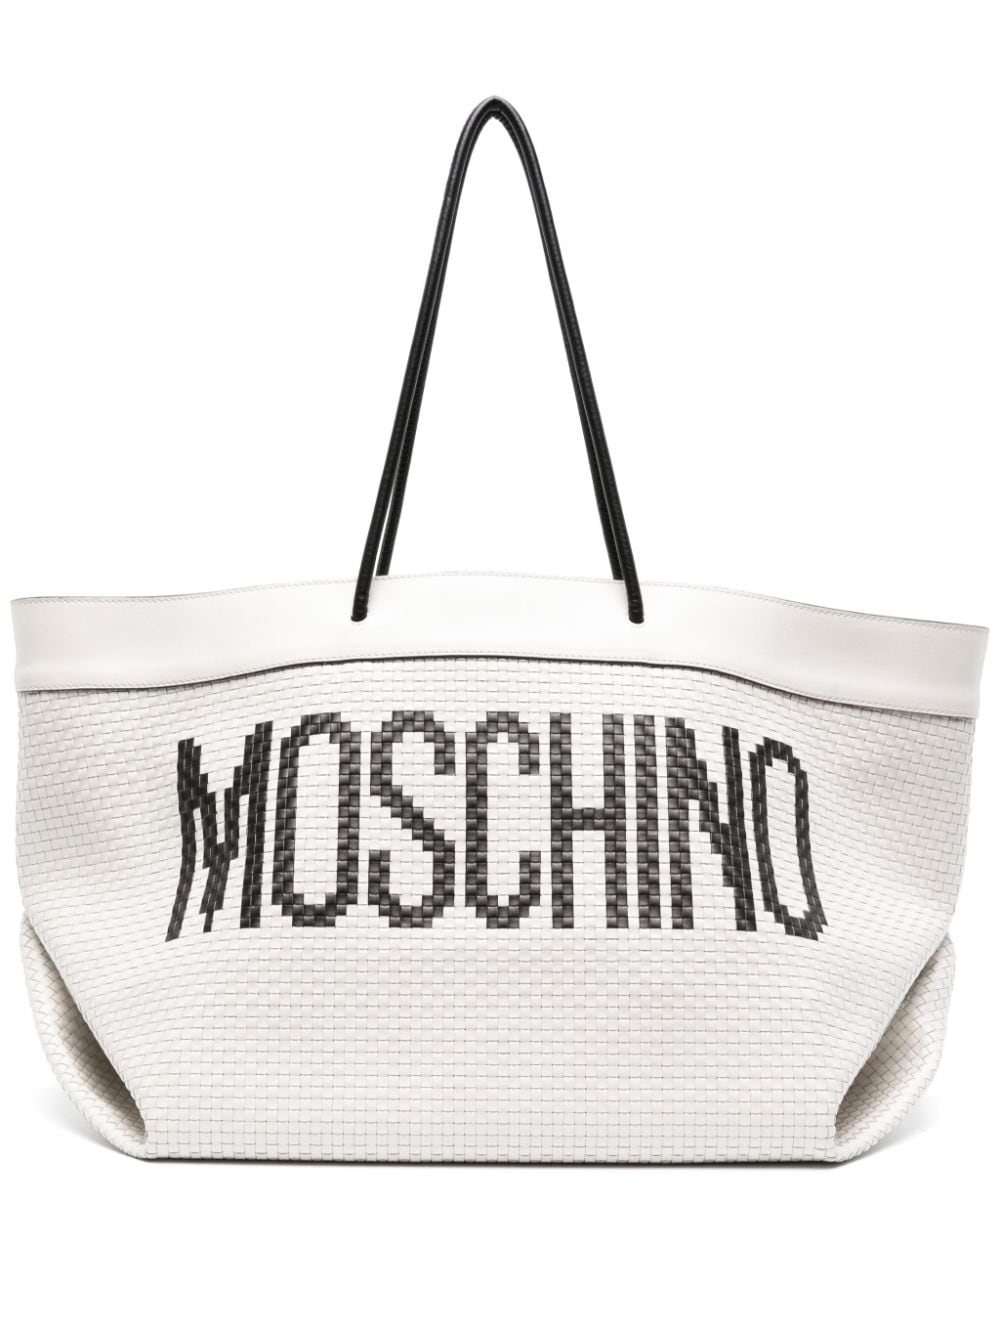 Moschino Interwoven Leather Shoulder Bag In White